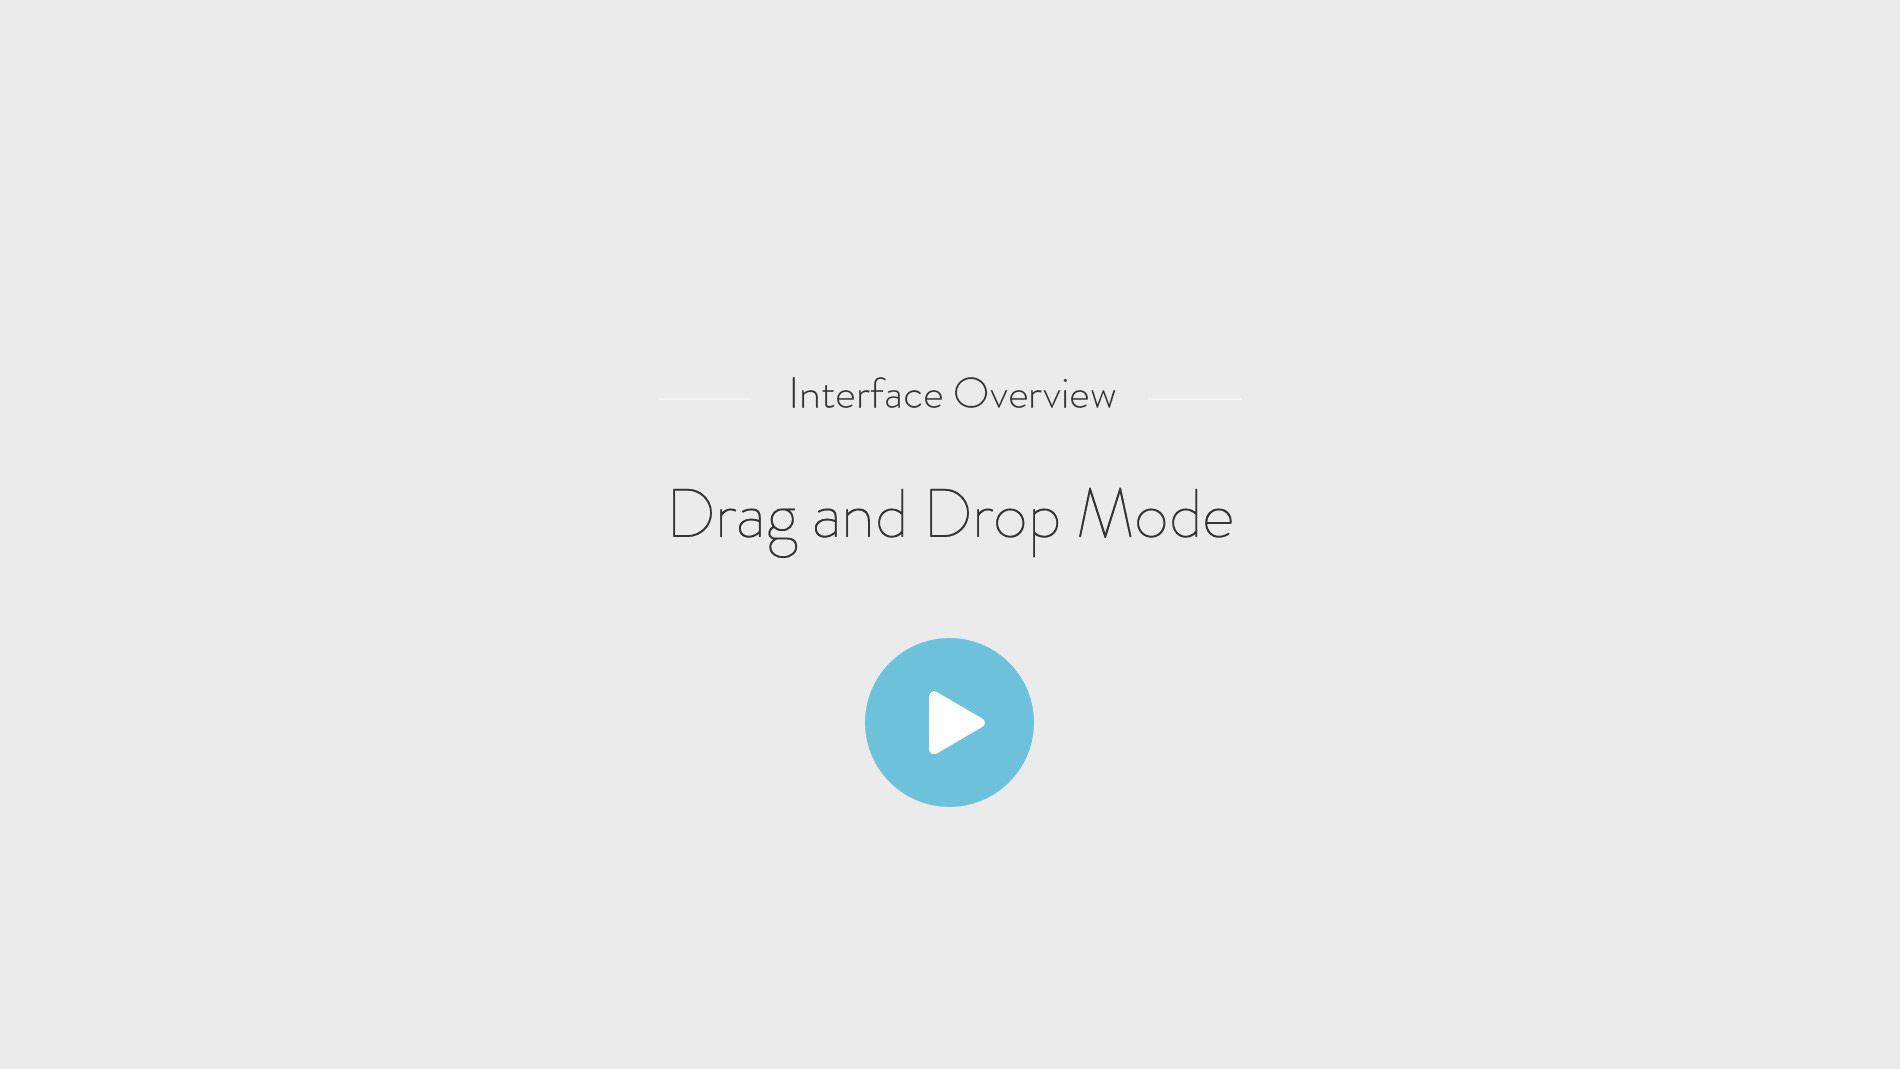 Interface Overview - Drag and Drop Mode